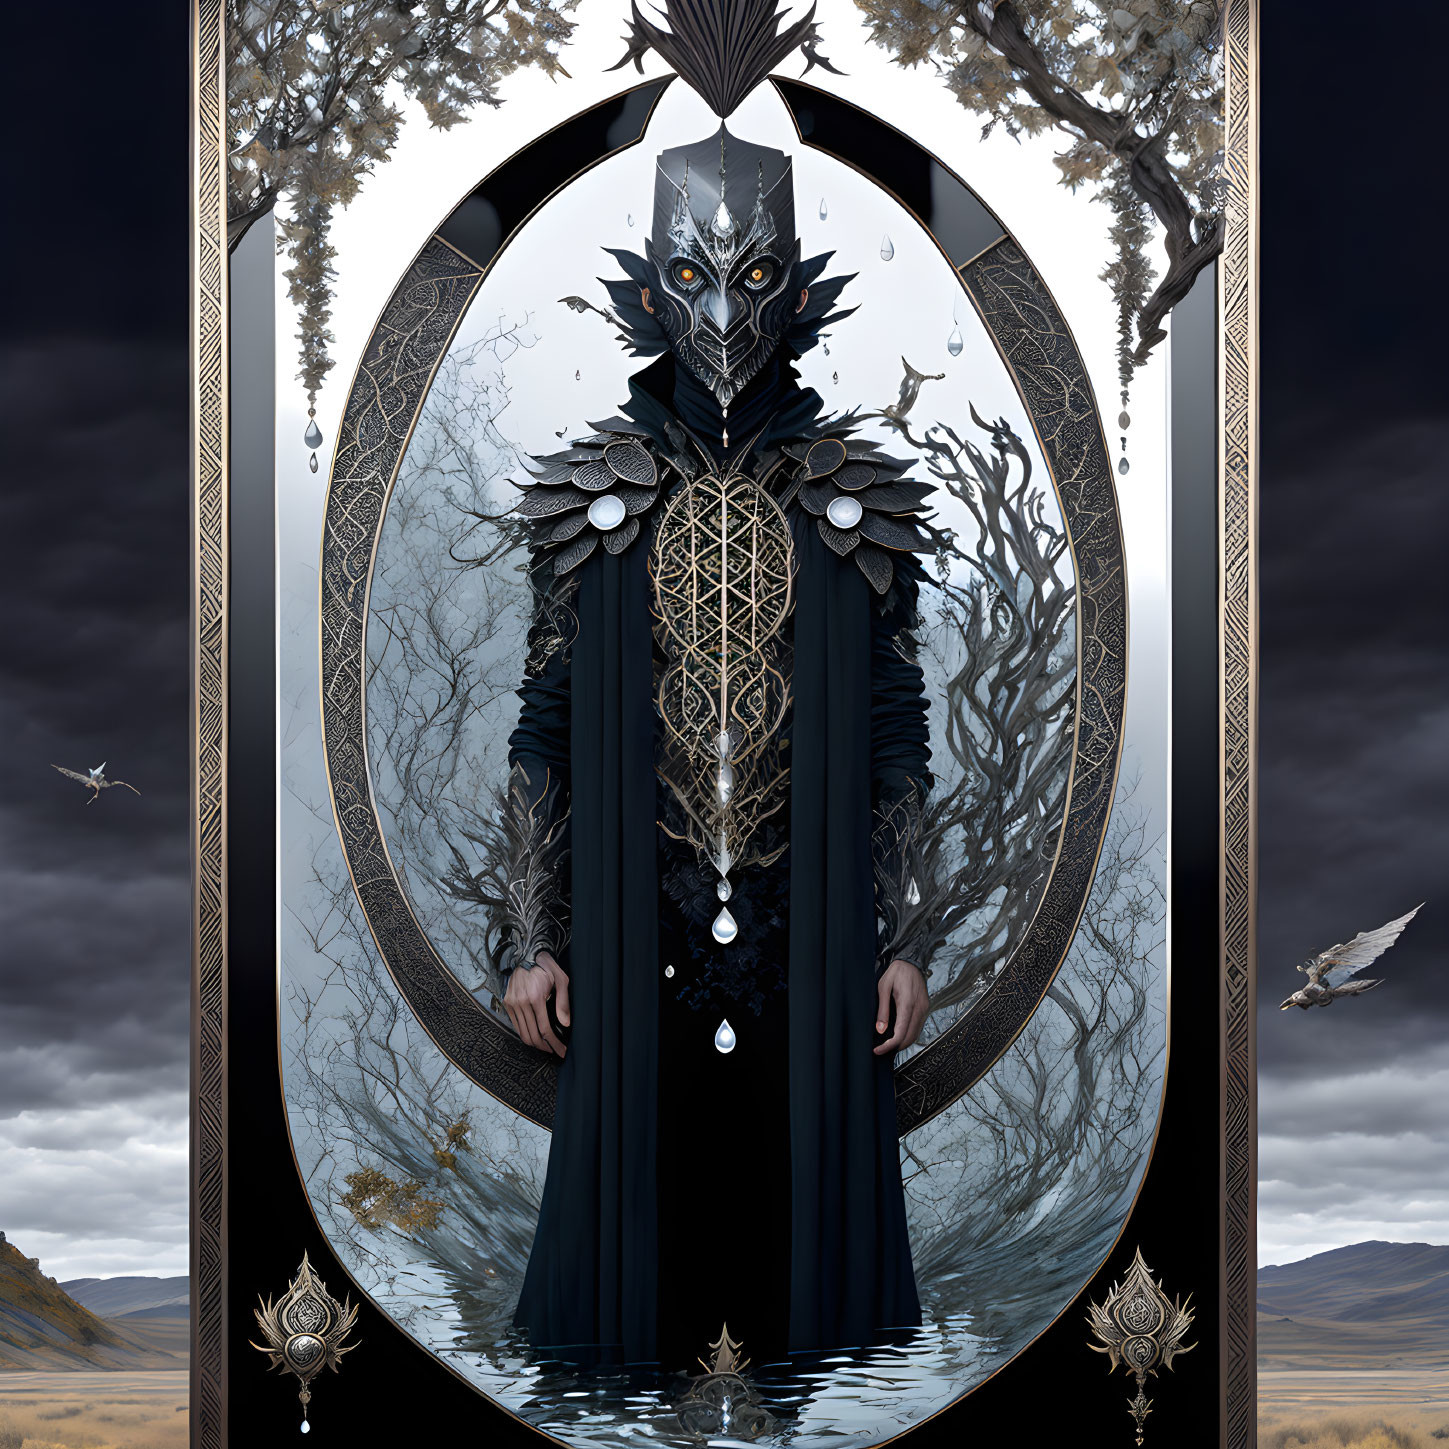 Mysterious figure in black robe with bird-like mask by barren tree and ornate oval frame.